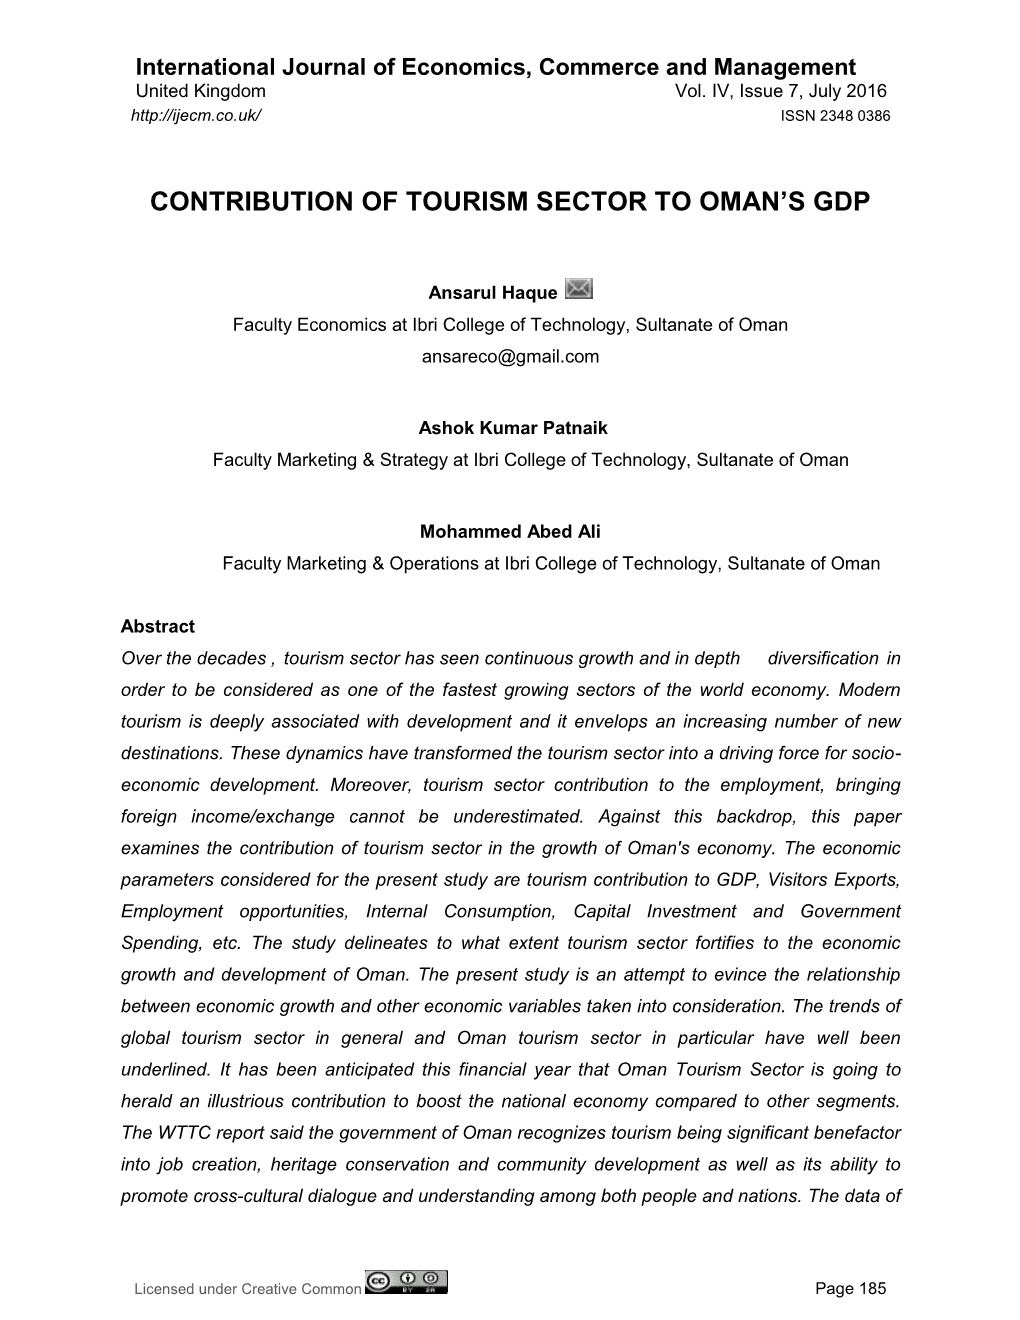 Contribution of Tourism Sector to Oman's